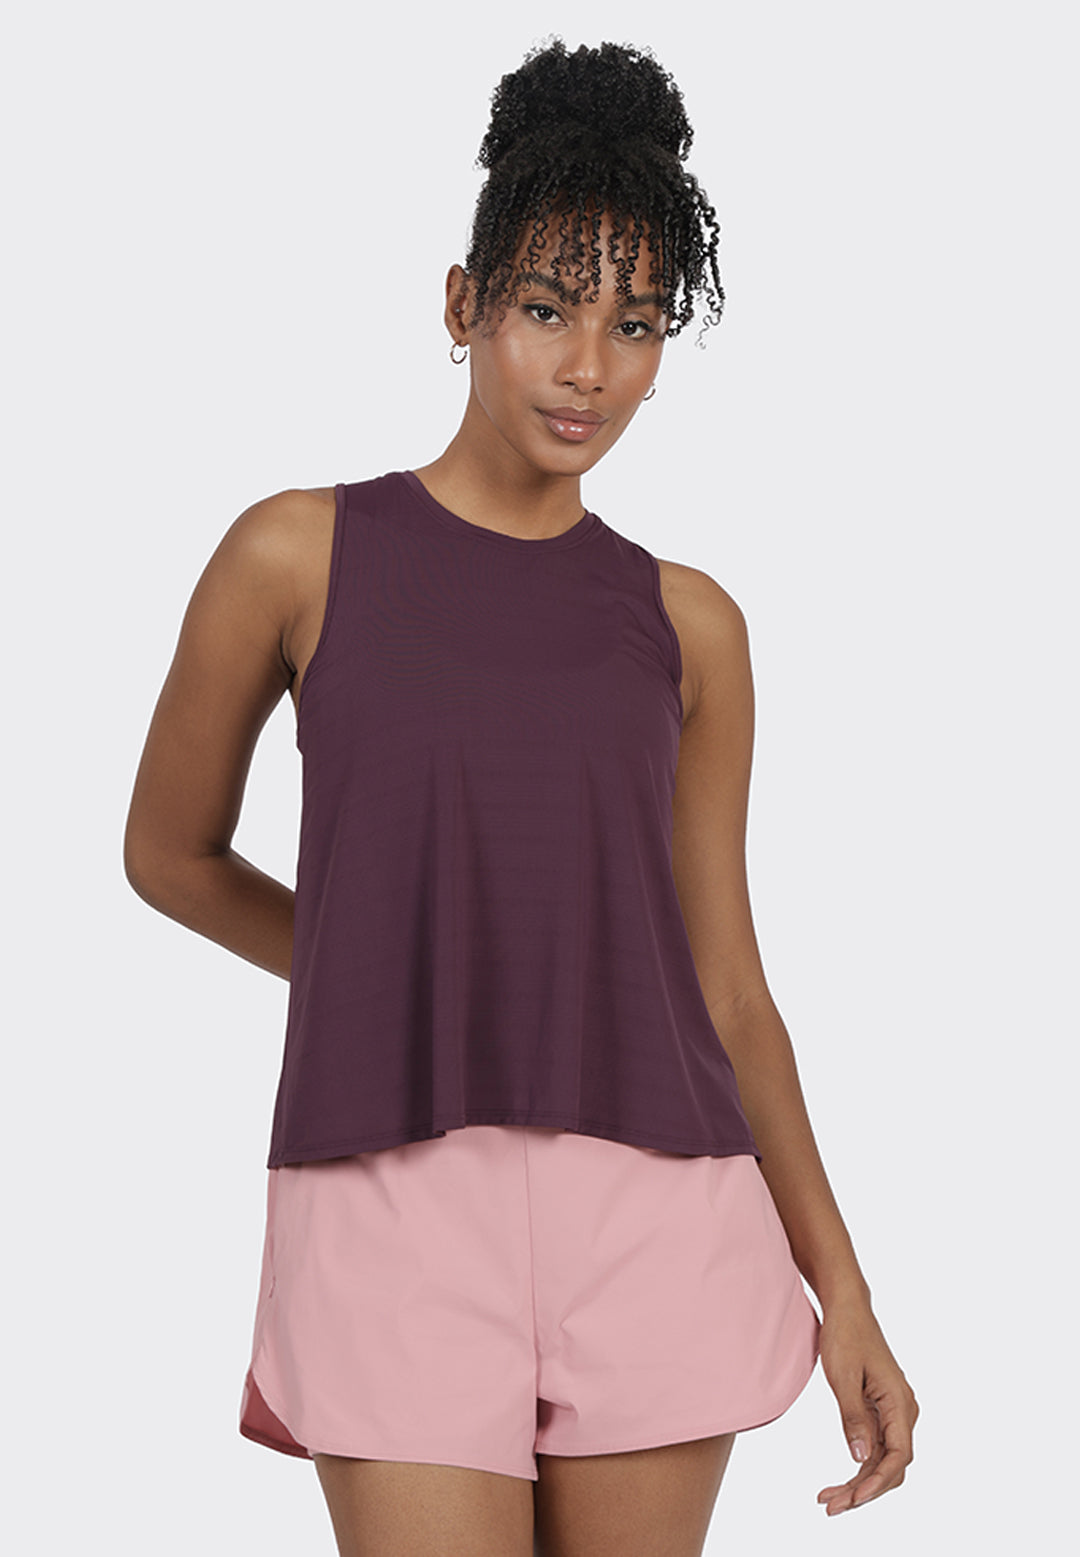 Download Black Tank Top - Casual or Formal Wear PNG Online - Creative  Fabrica